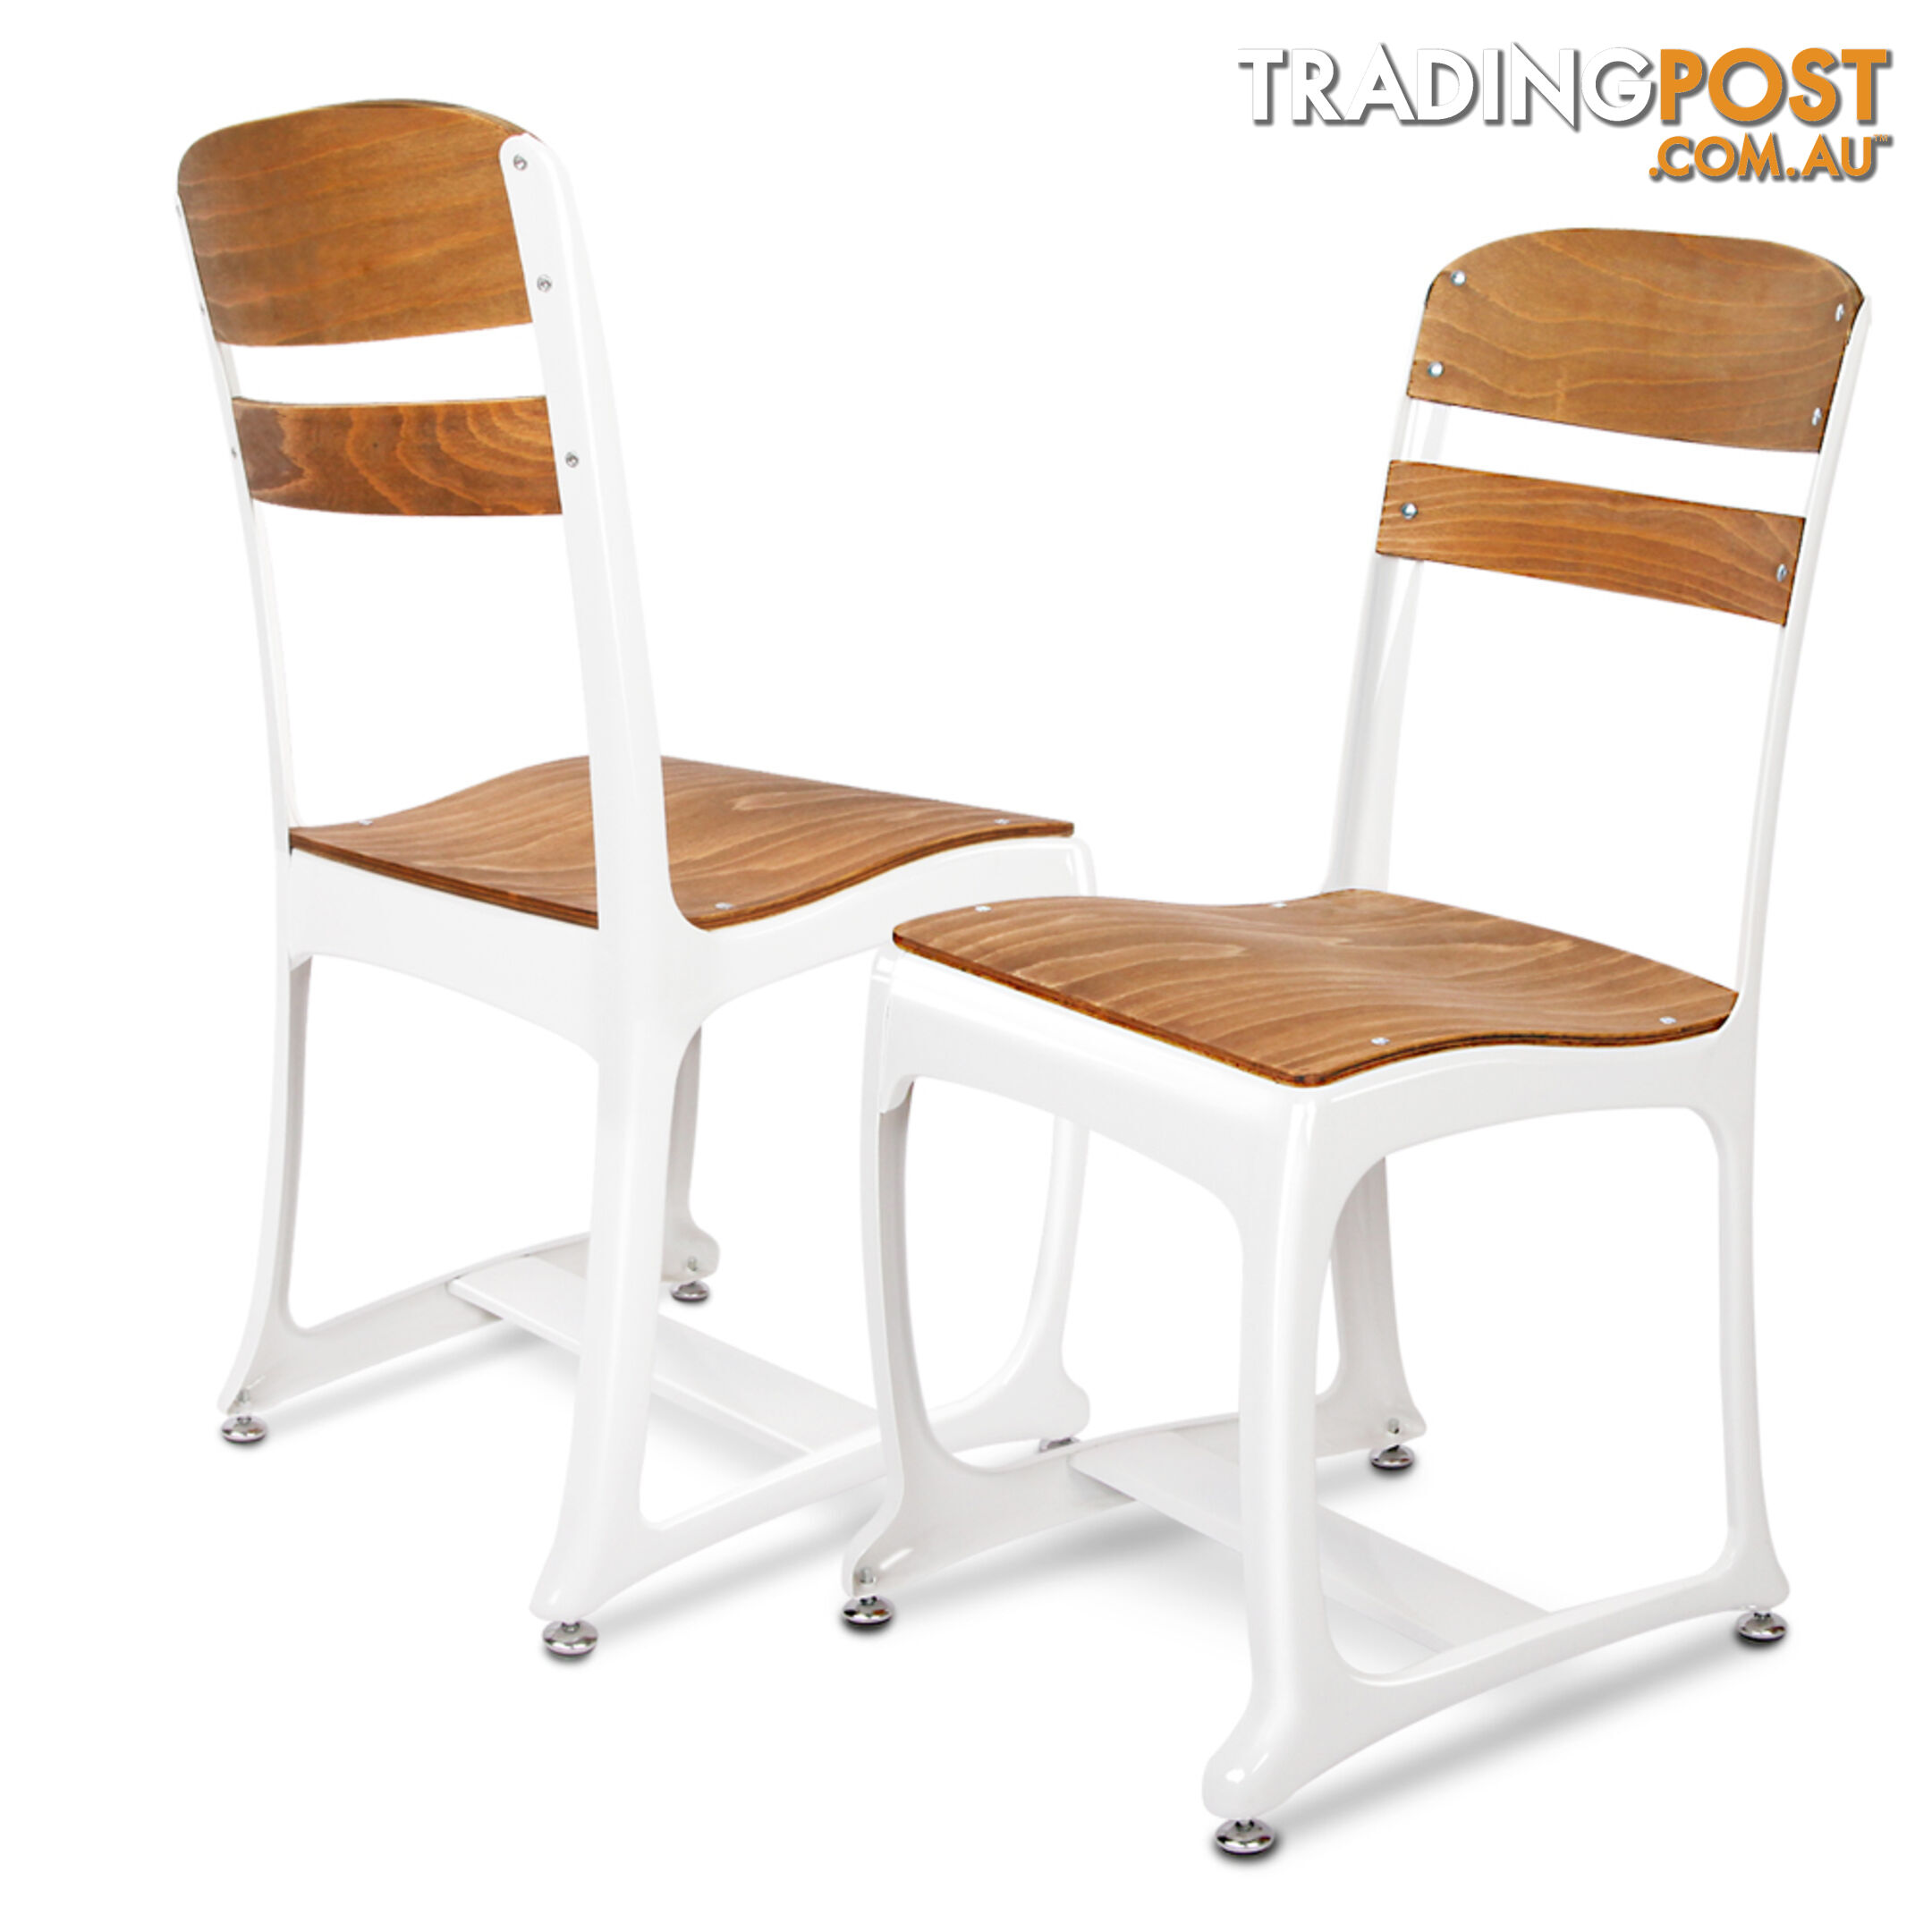 2 x Replica Eton Dining Chairs Vintage Warehouse Industrial Style Chair White